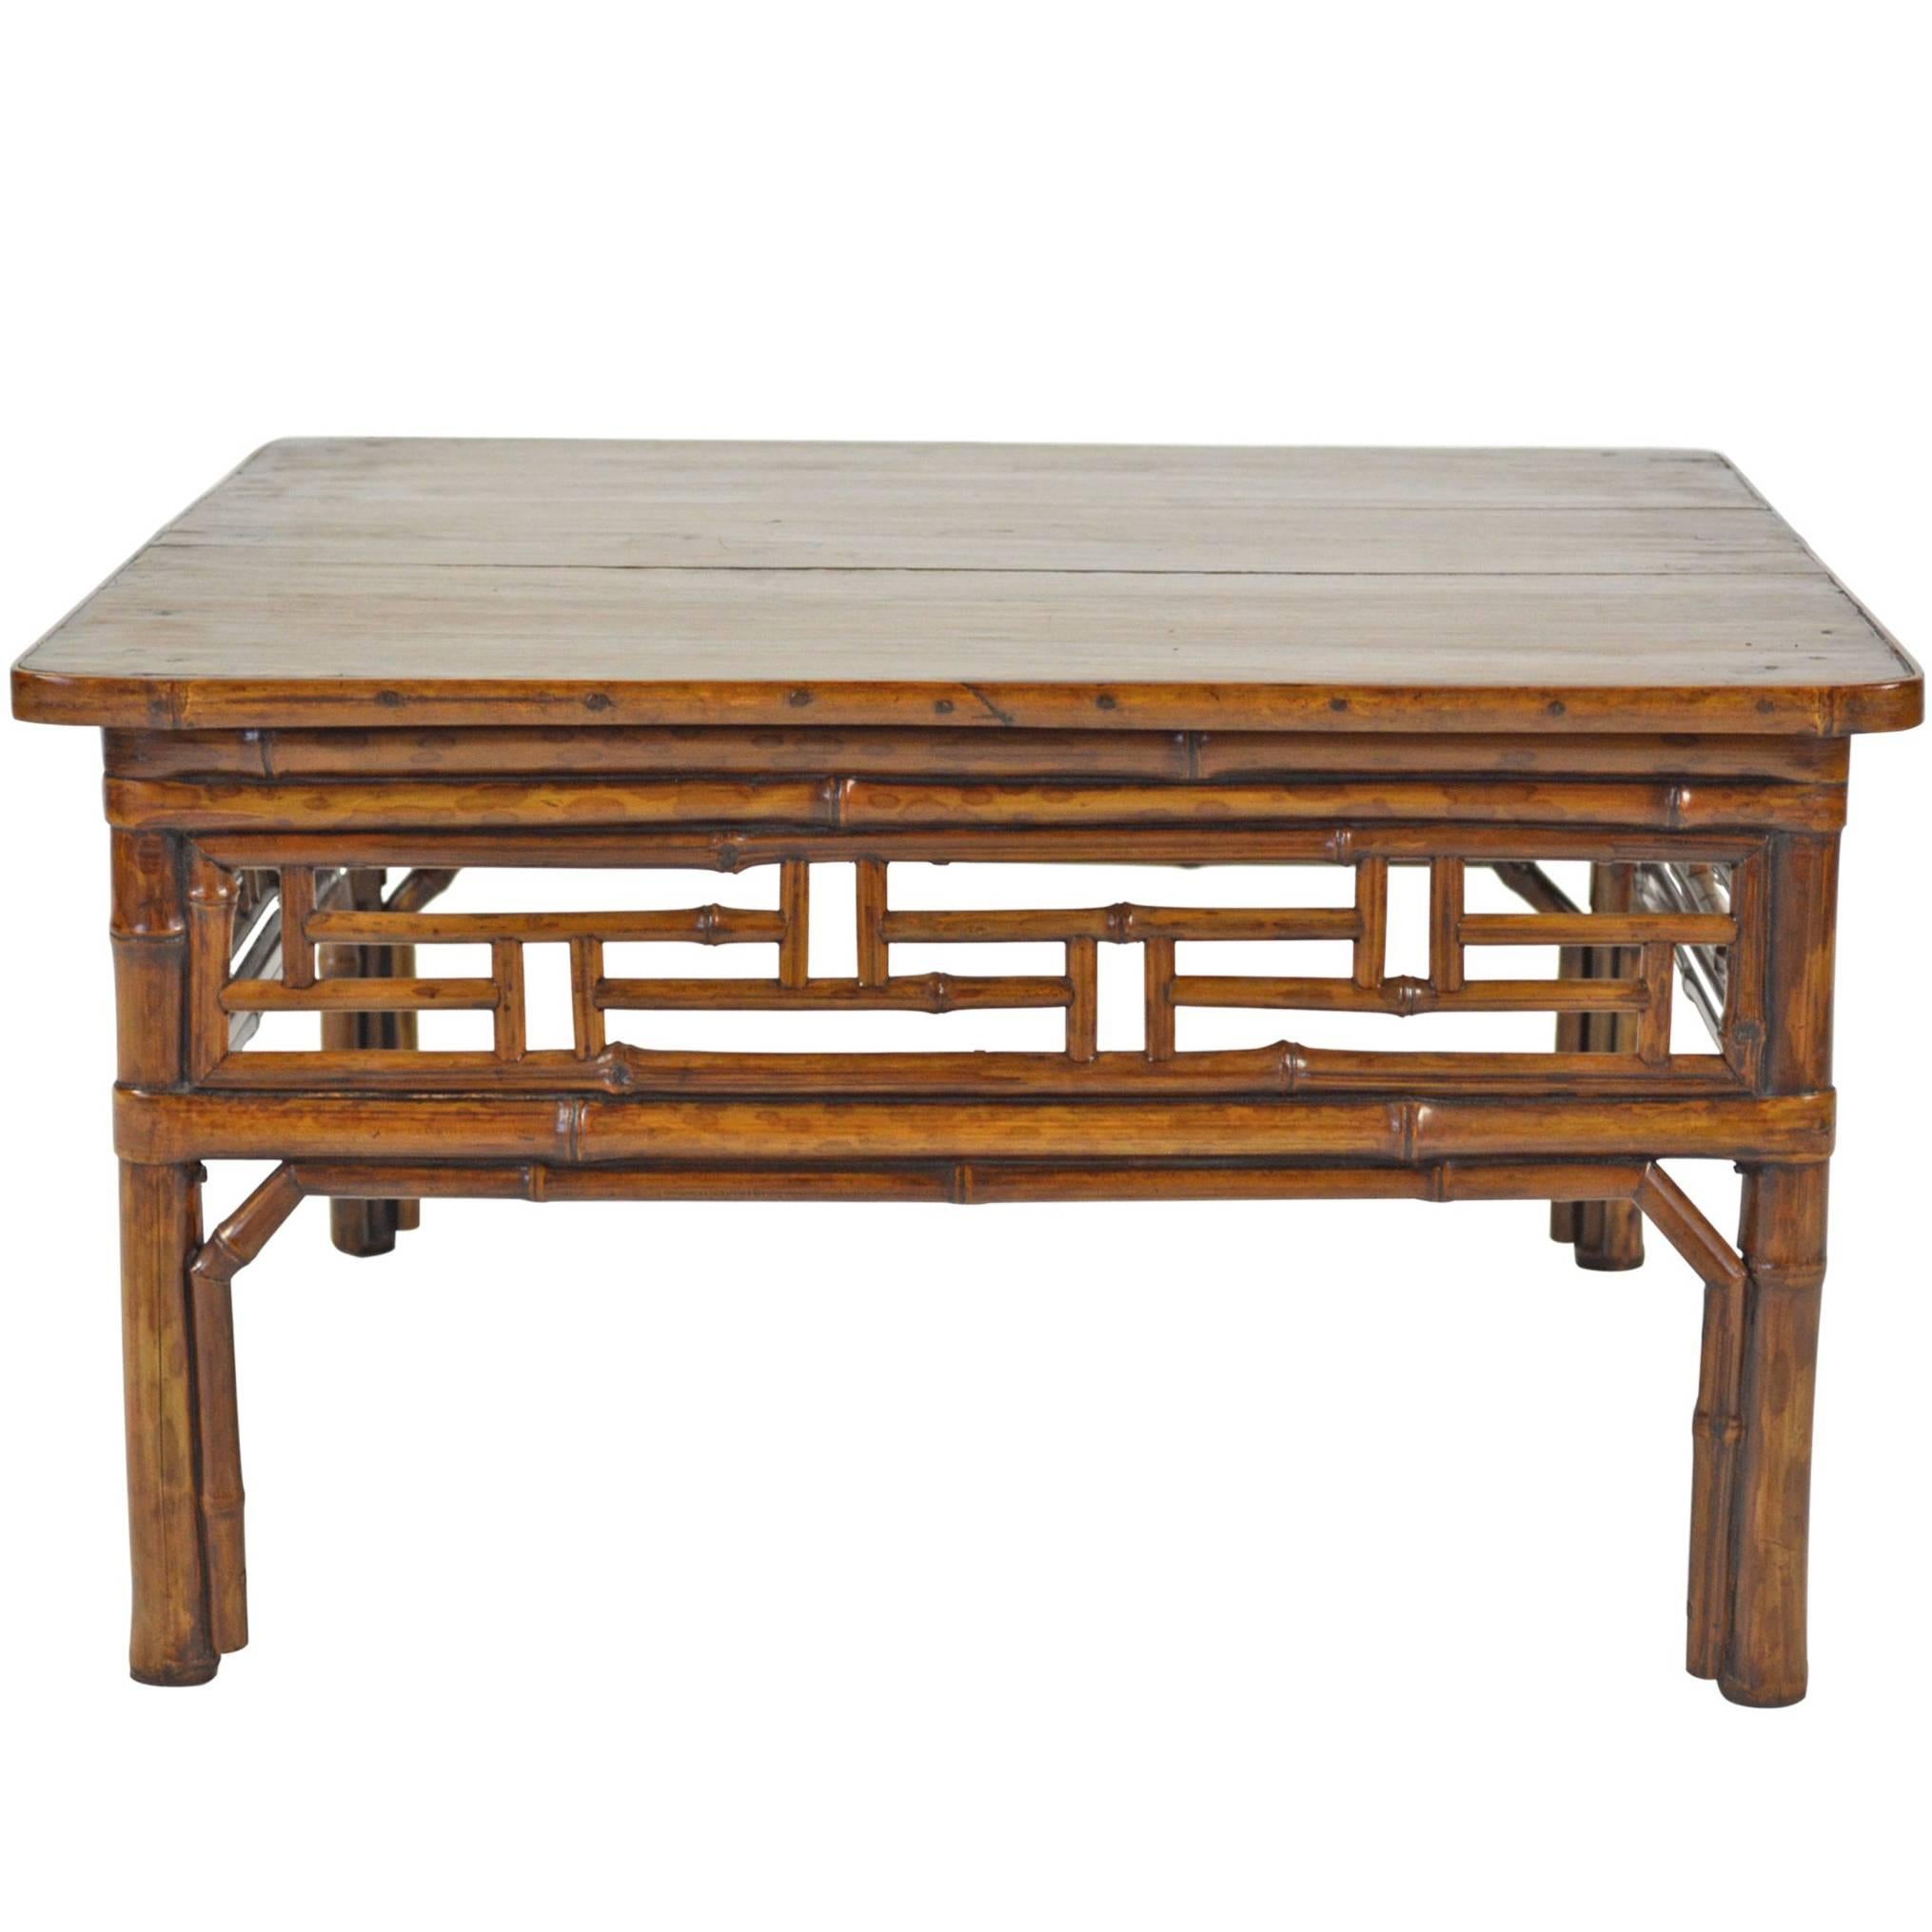 Chinese Low Bamboo Table